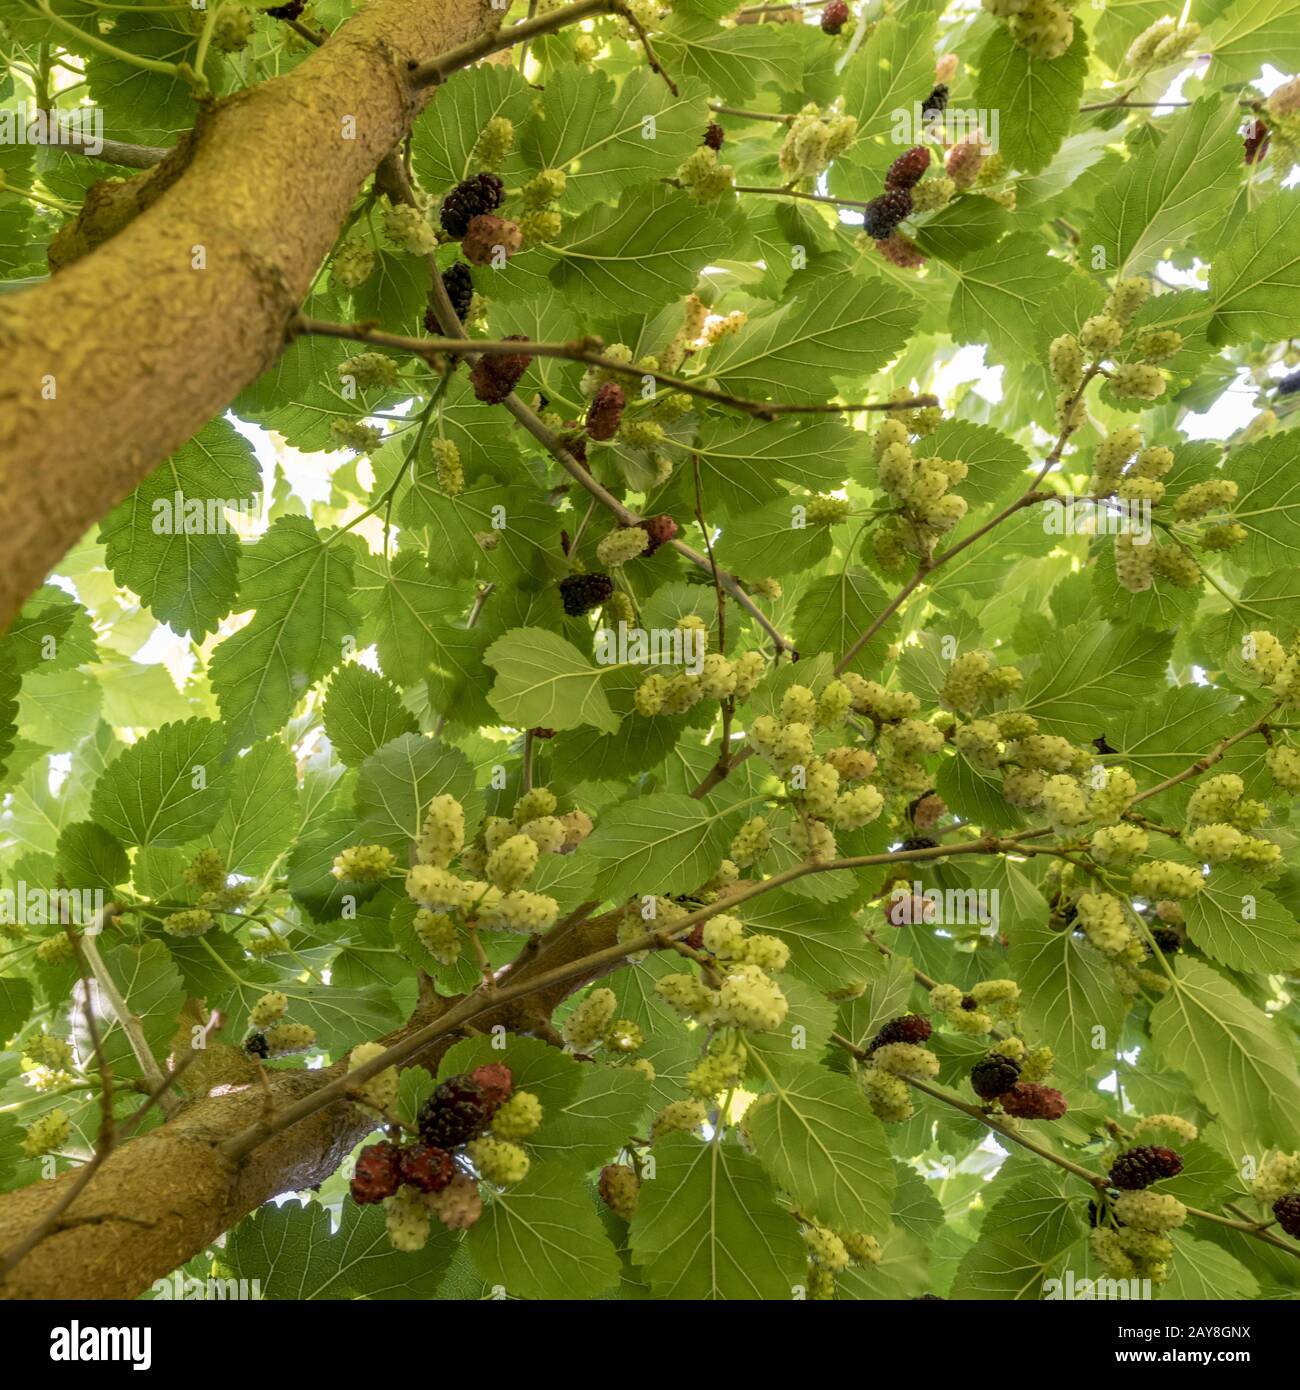 Mulberries in different maturity levels hang on the branches Stock Photo